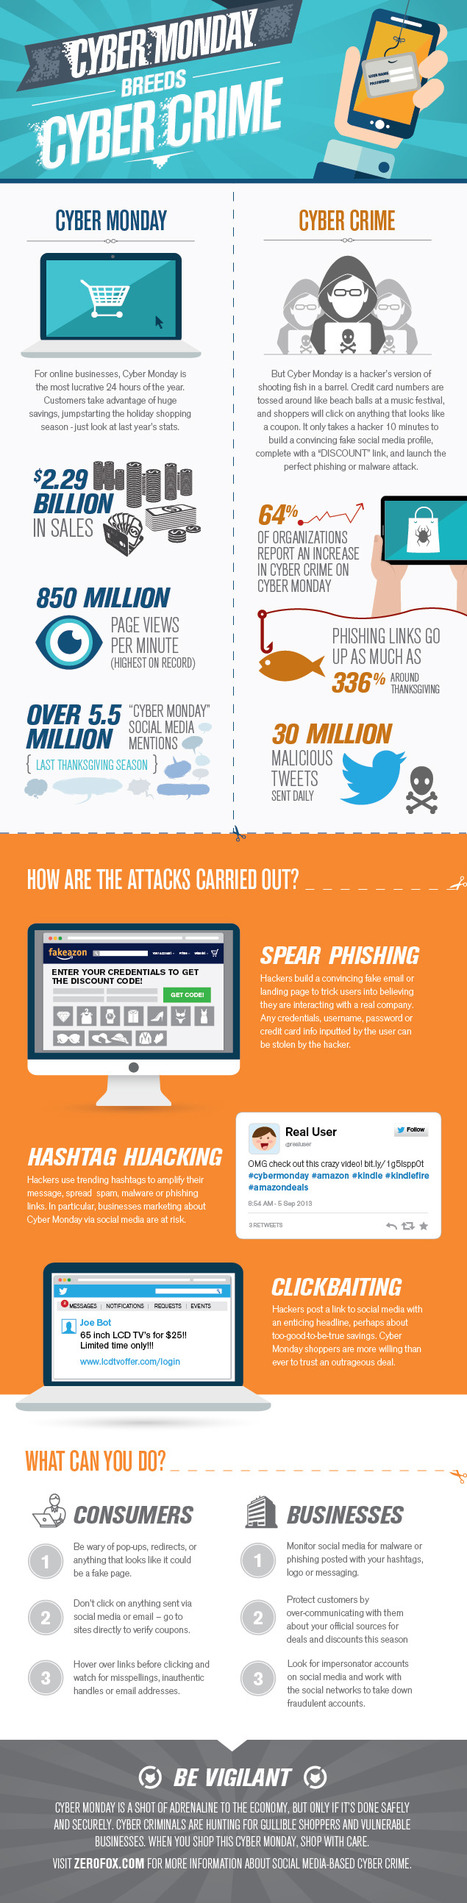 How hackers are stealing this Cyber Monday (Infographic) | CyberSecurity | Phishing | Daily Magazine | Scoop.it